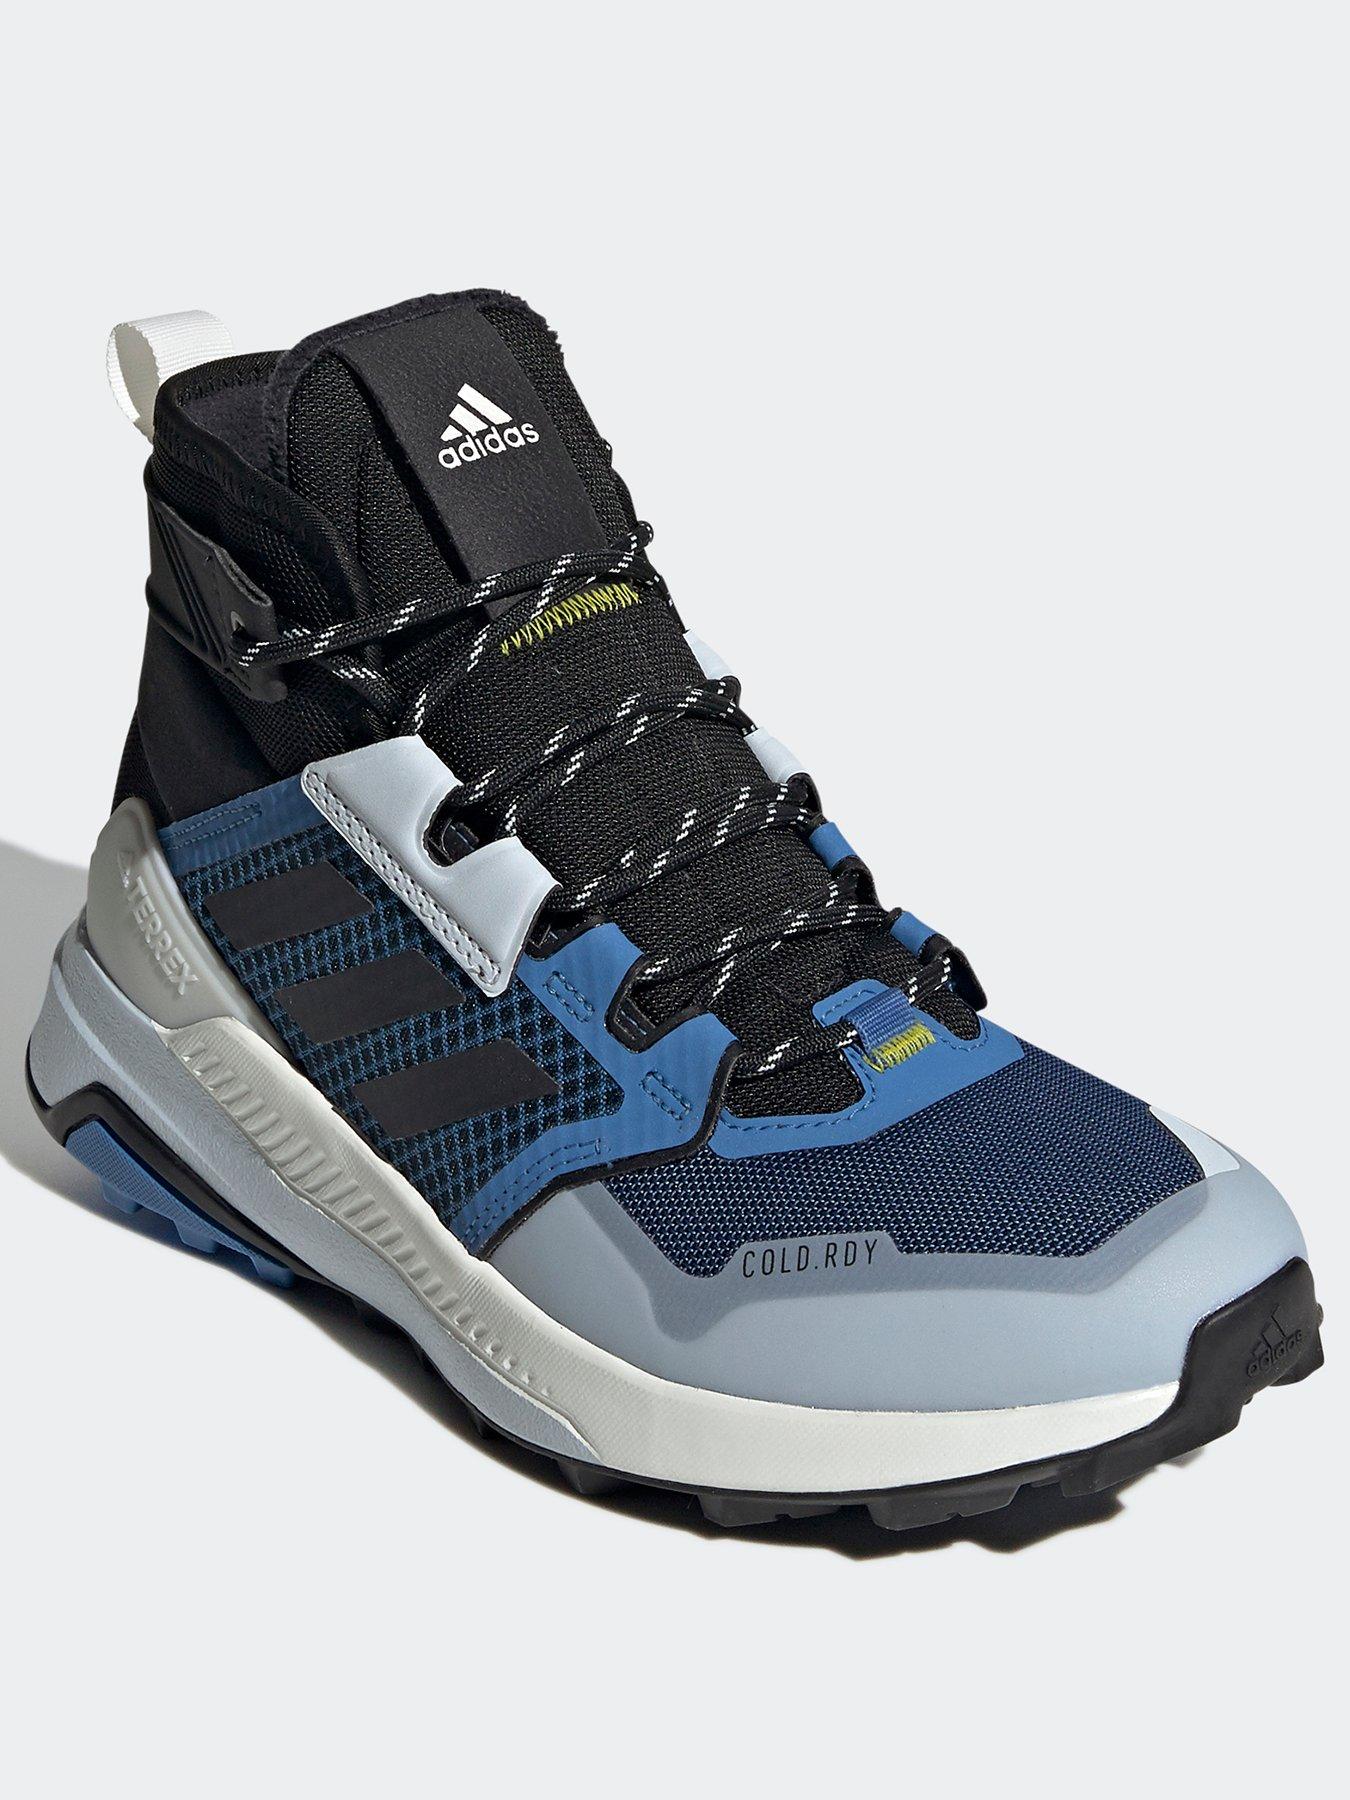  Terrex Trailmaker Mid Cold.rdy Hiking Shoes